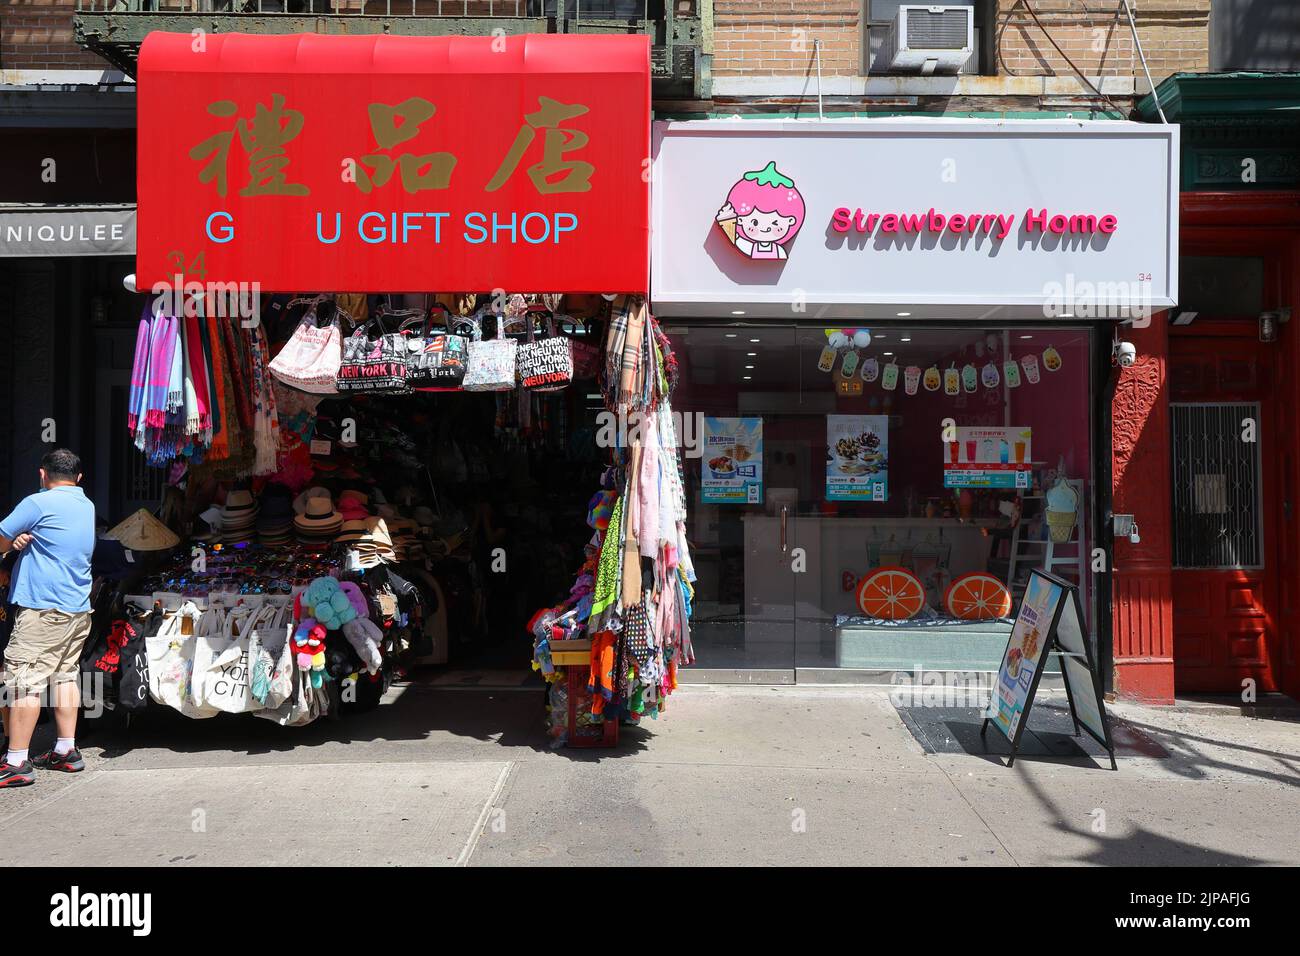 gift shop, Strawberry Home, 34 Mott St, New York, NYC storefront photo of a bubble tea and soft serve ice cream store in Manhattan Chinatown. Stock Photo